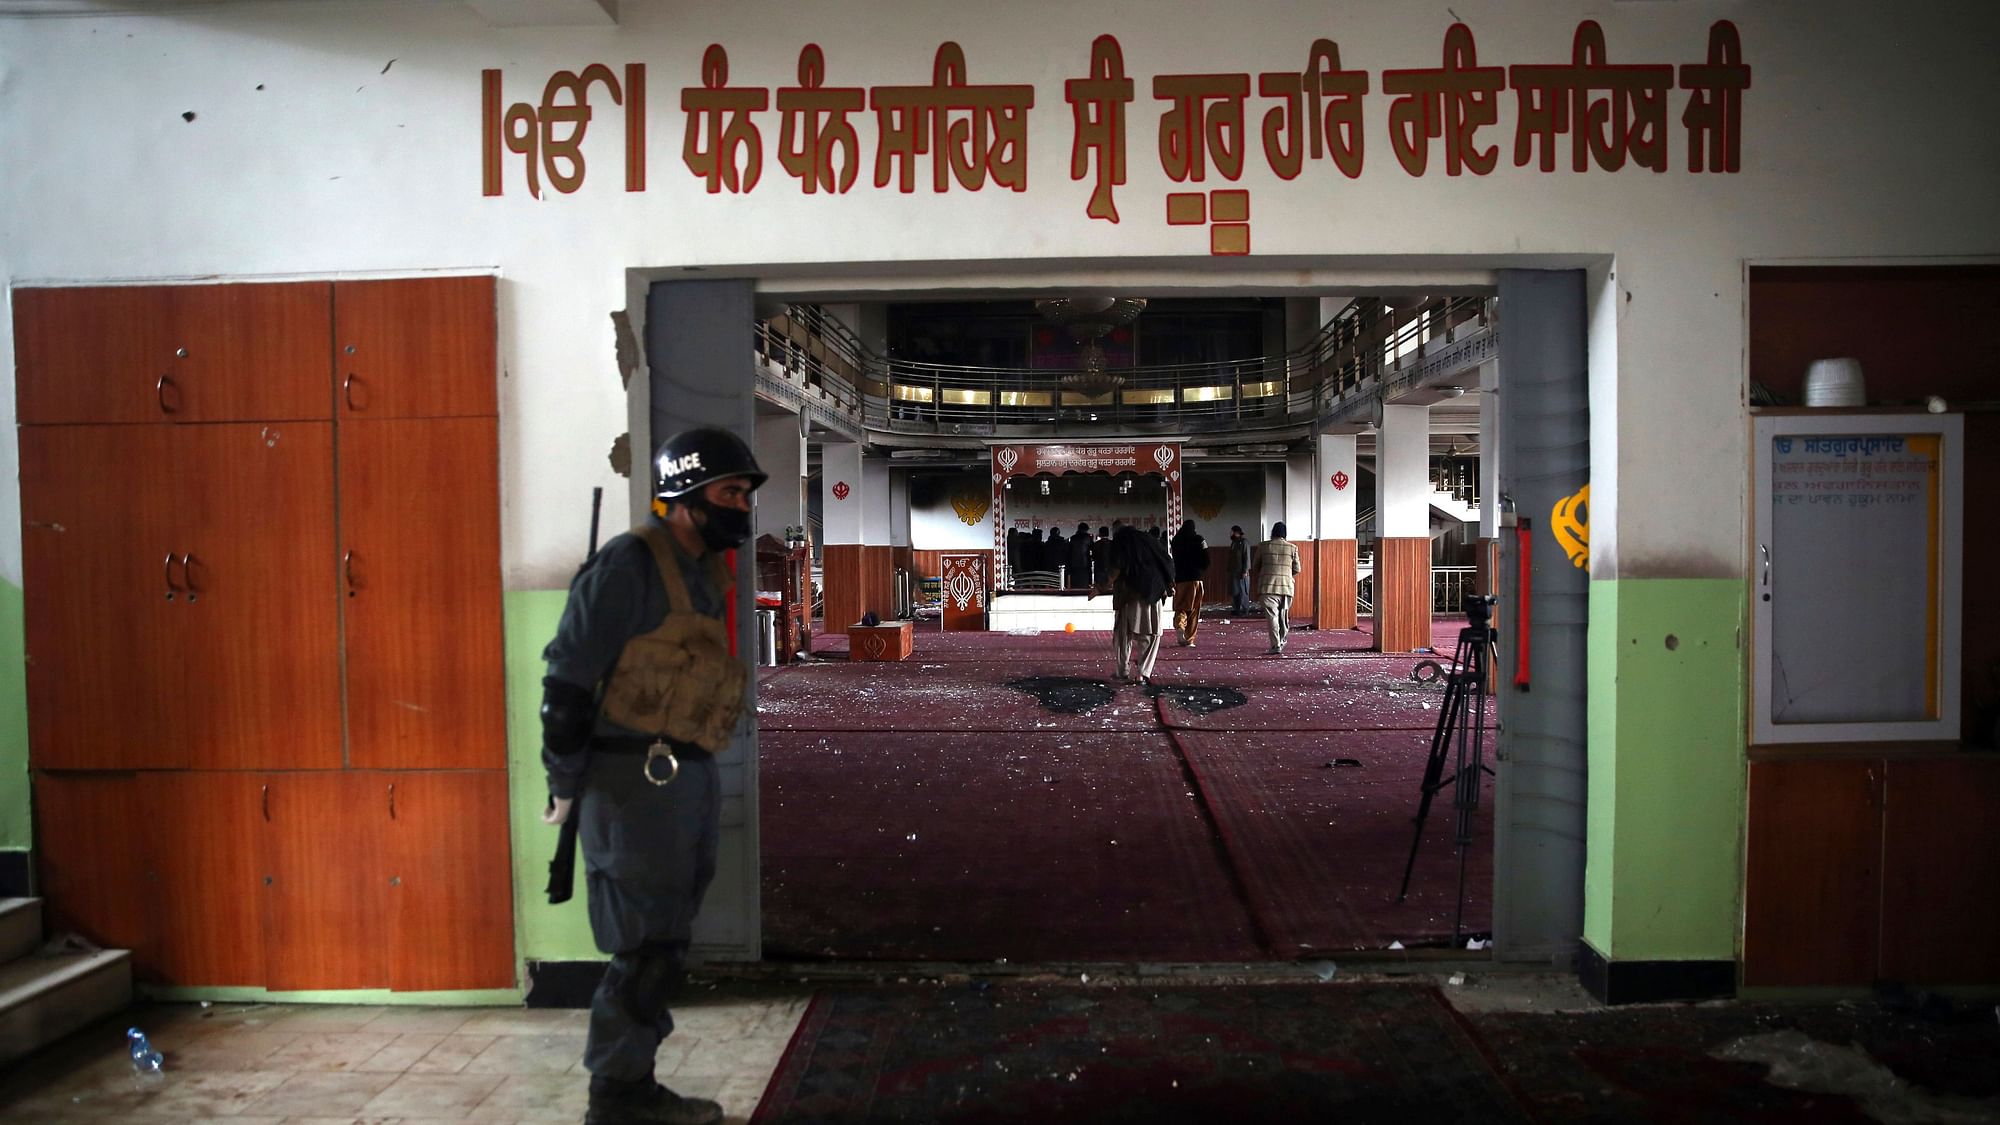 An Afghan policeman stands guard at the entrance of the gurudwara.